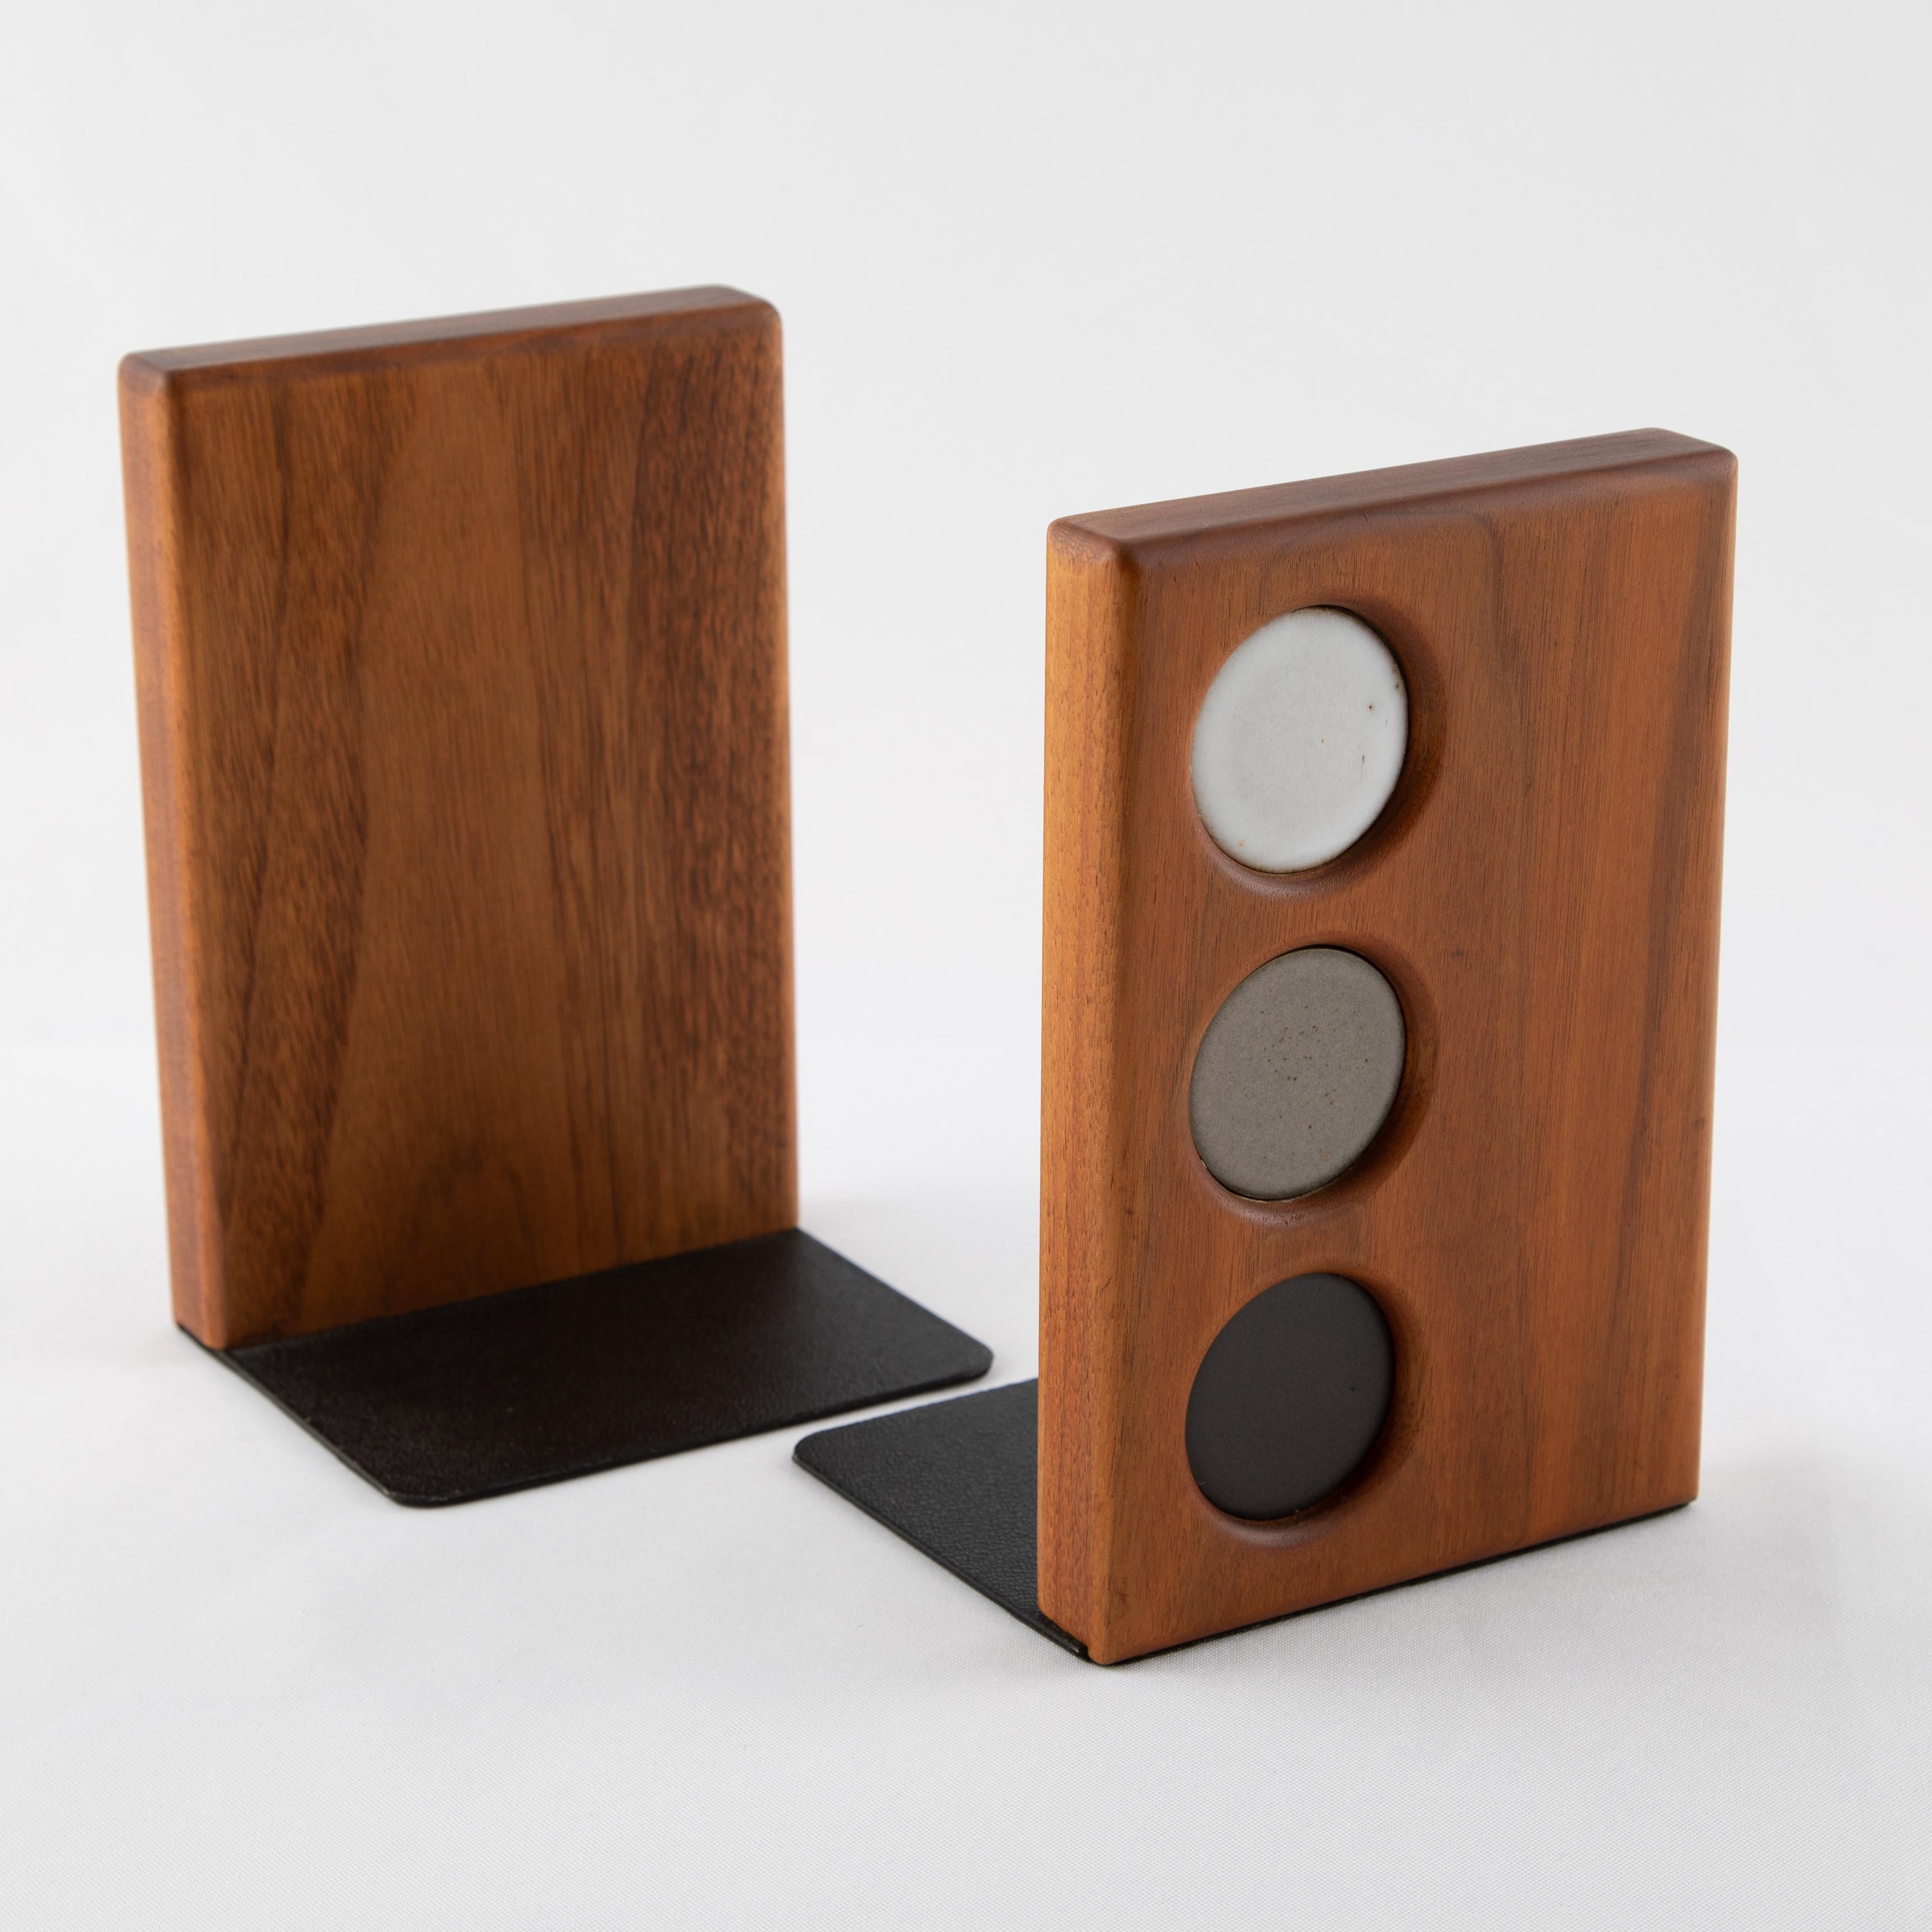 American 1960s Ceramic and Walnut Bookends by Gordon and Jane Martz for Marshall Studios For Sale